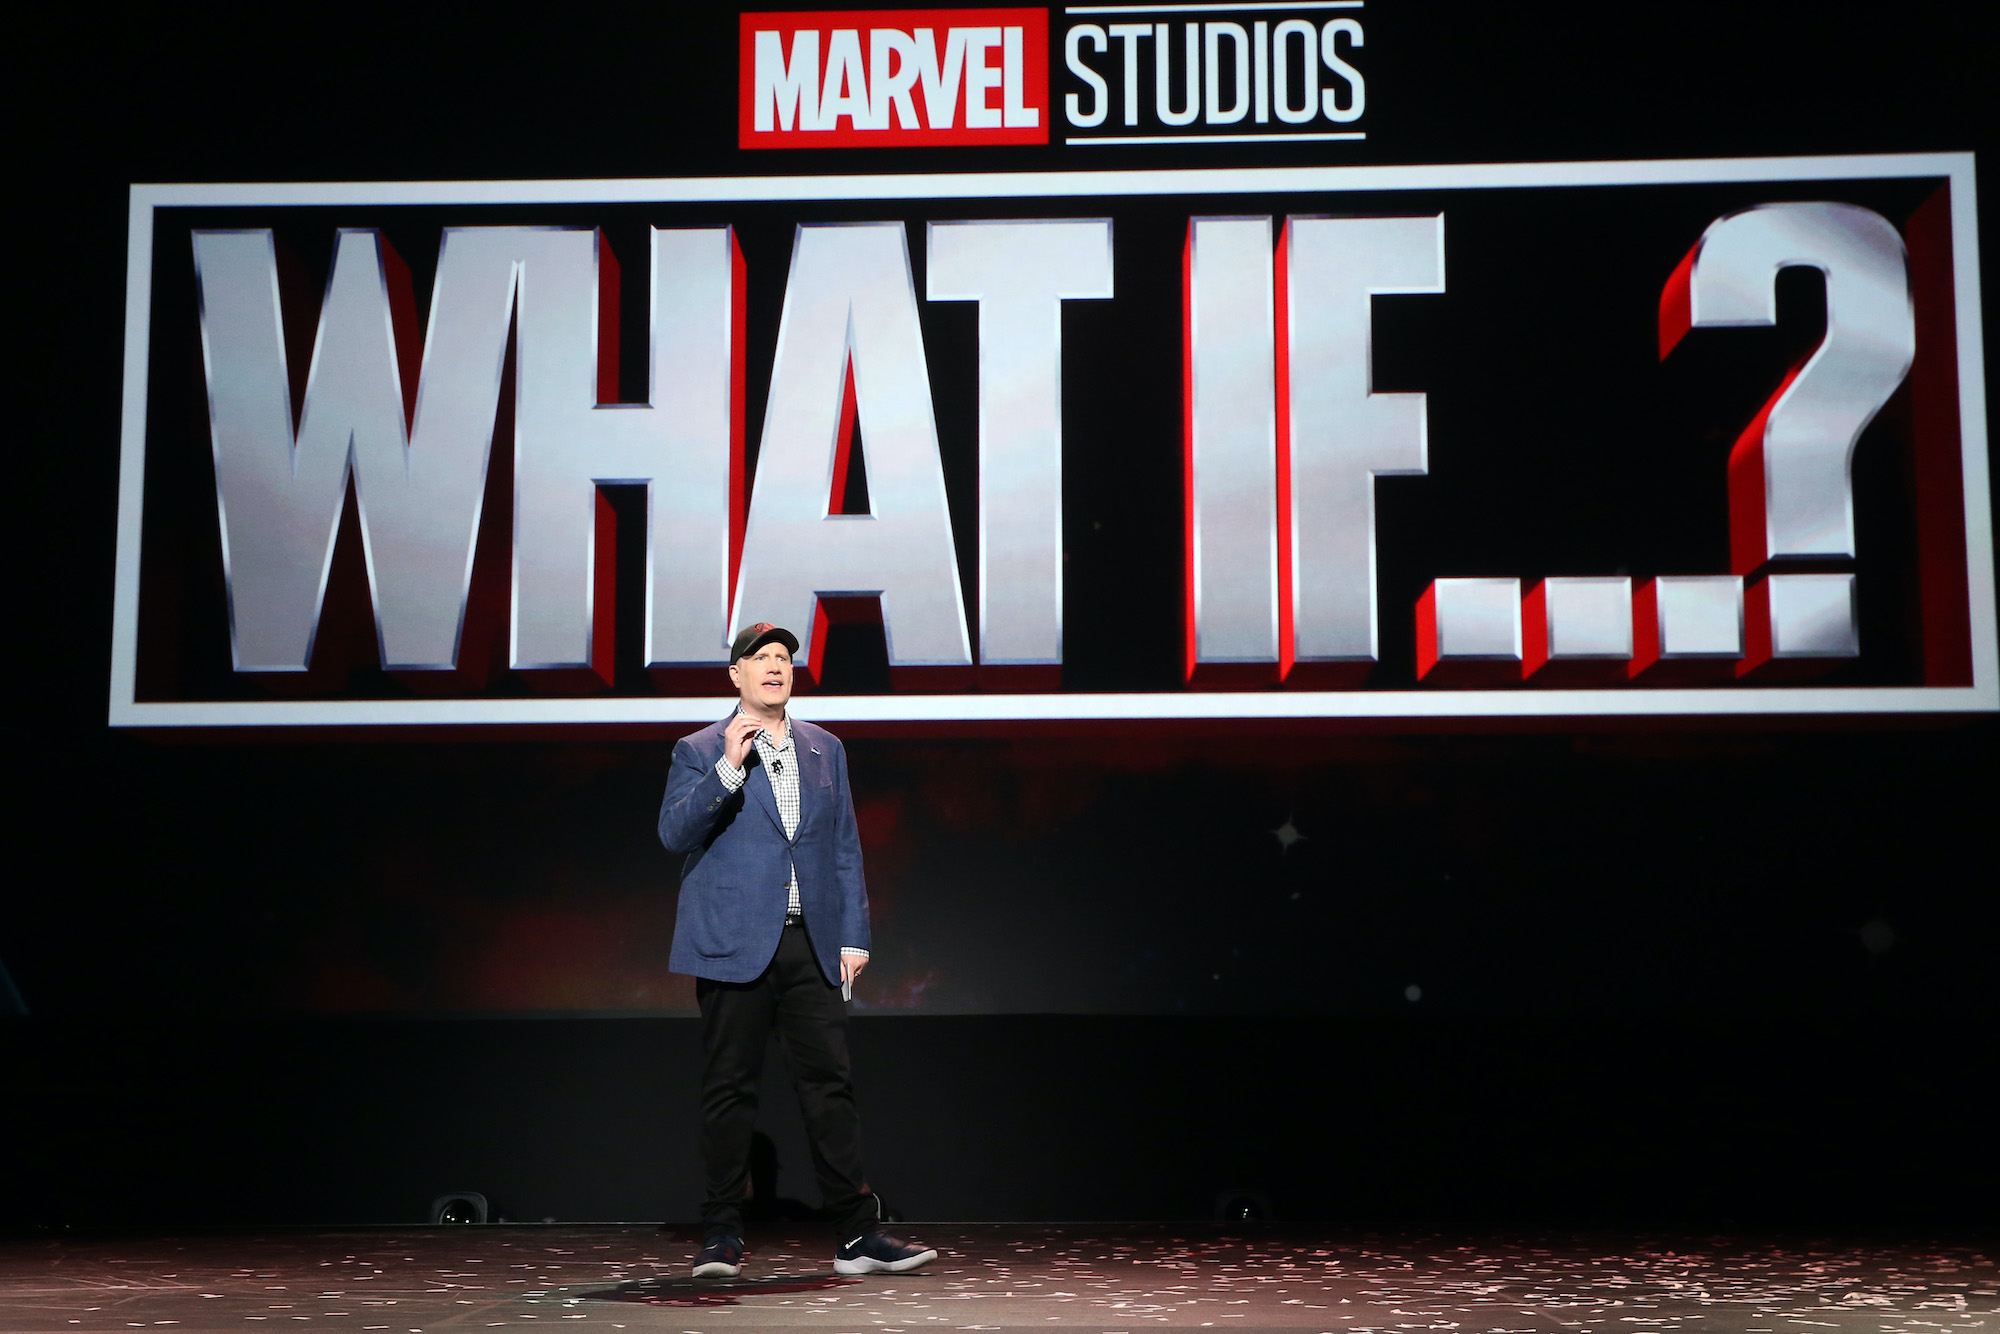 Kevin Feige stands onstage and speaks to an audience